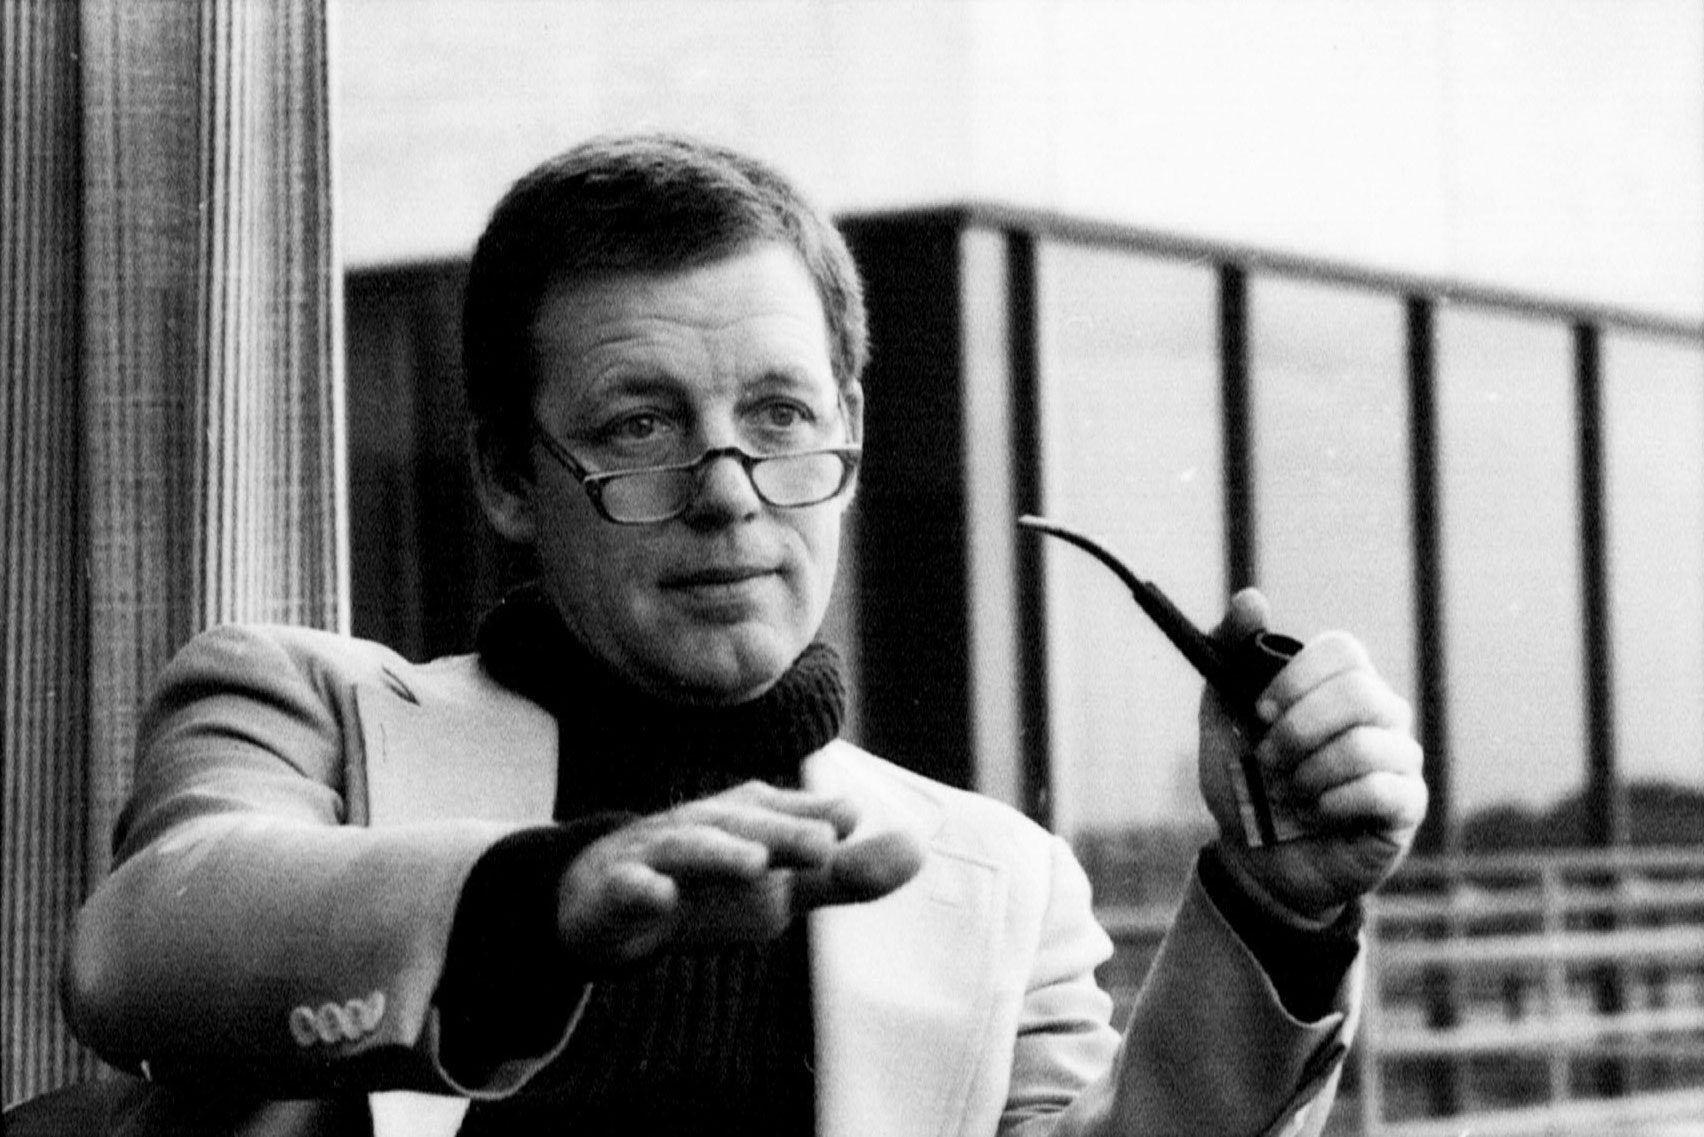 Bob Taylor and his pipe. Image from Wired.